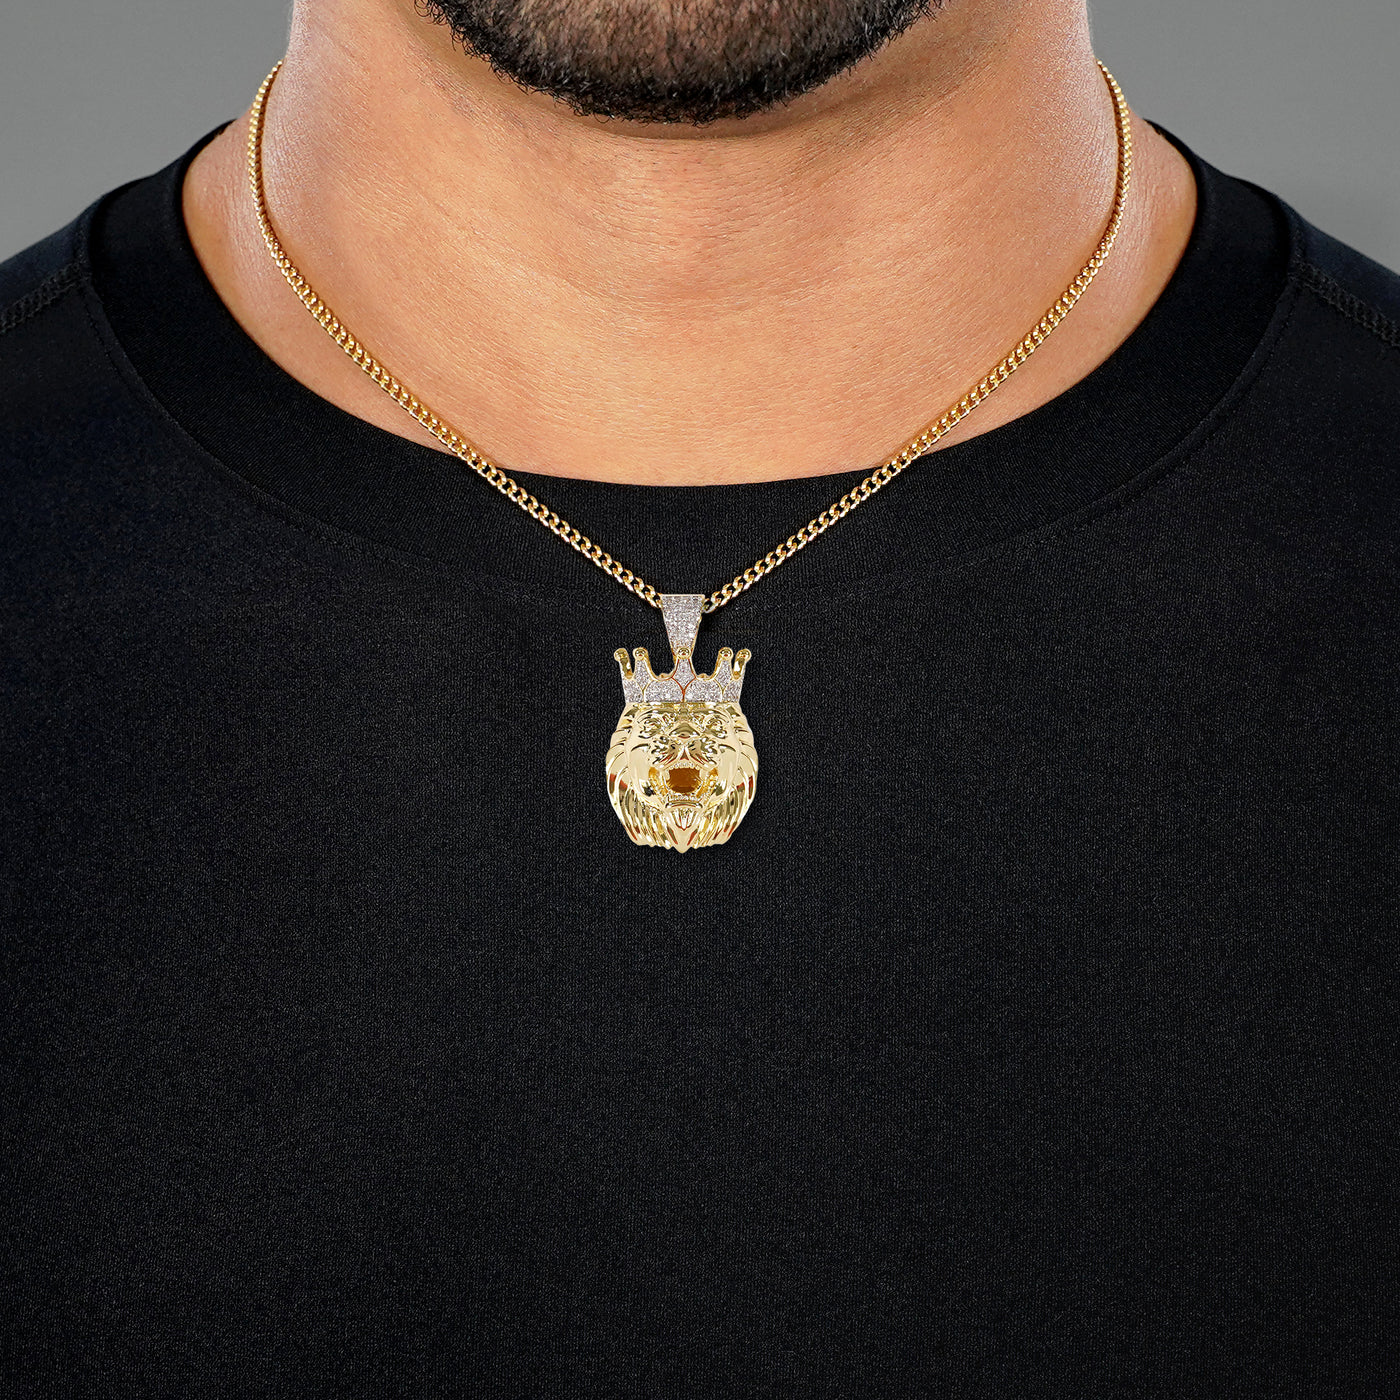 Lion King 1½" Pendant with Chain Necklace - Gold Plated Stainless Steel